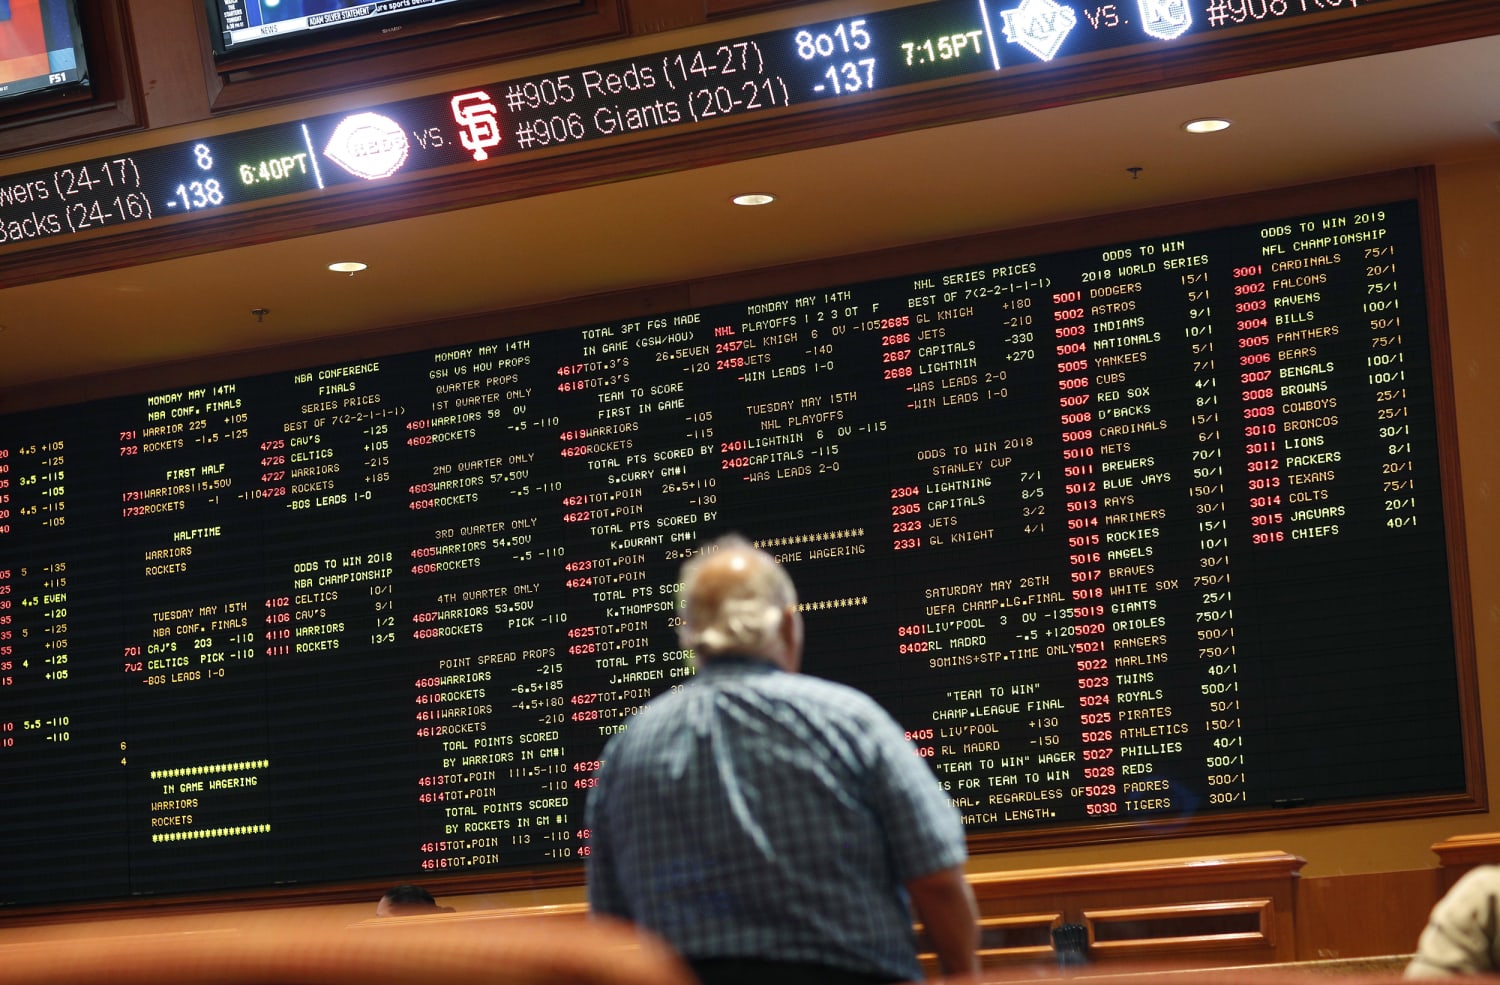 5 Best Sport Betting Site Mistakes It's Best To Never Make